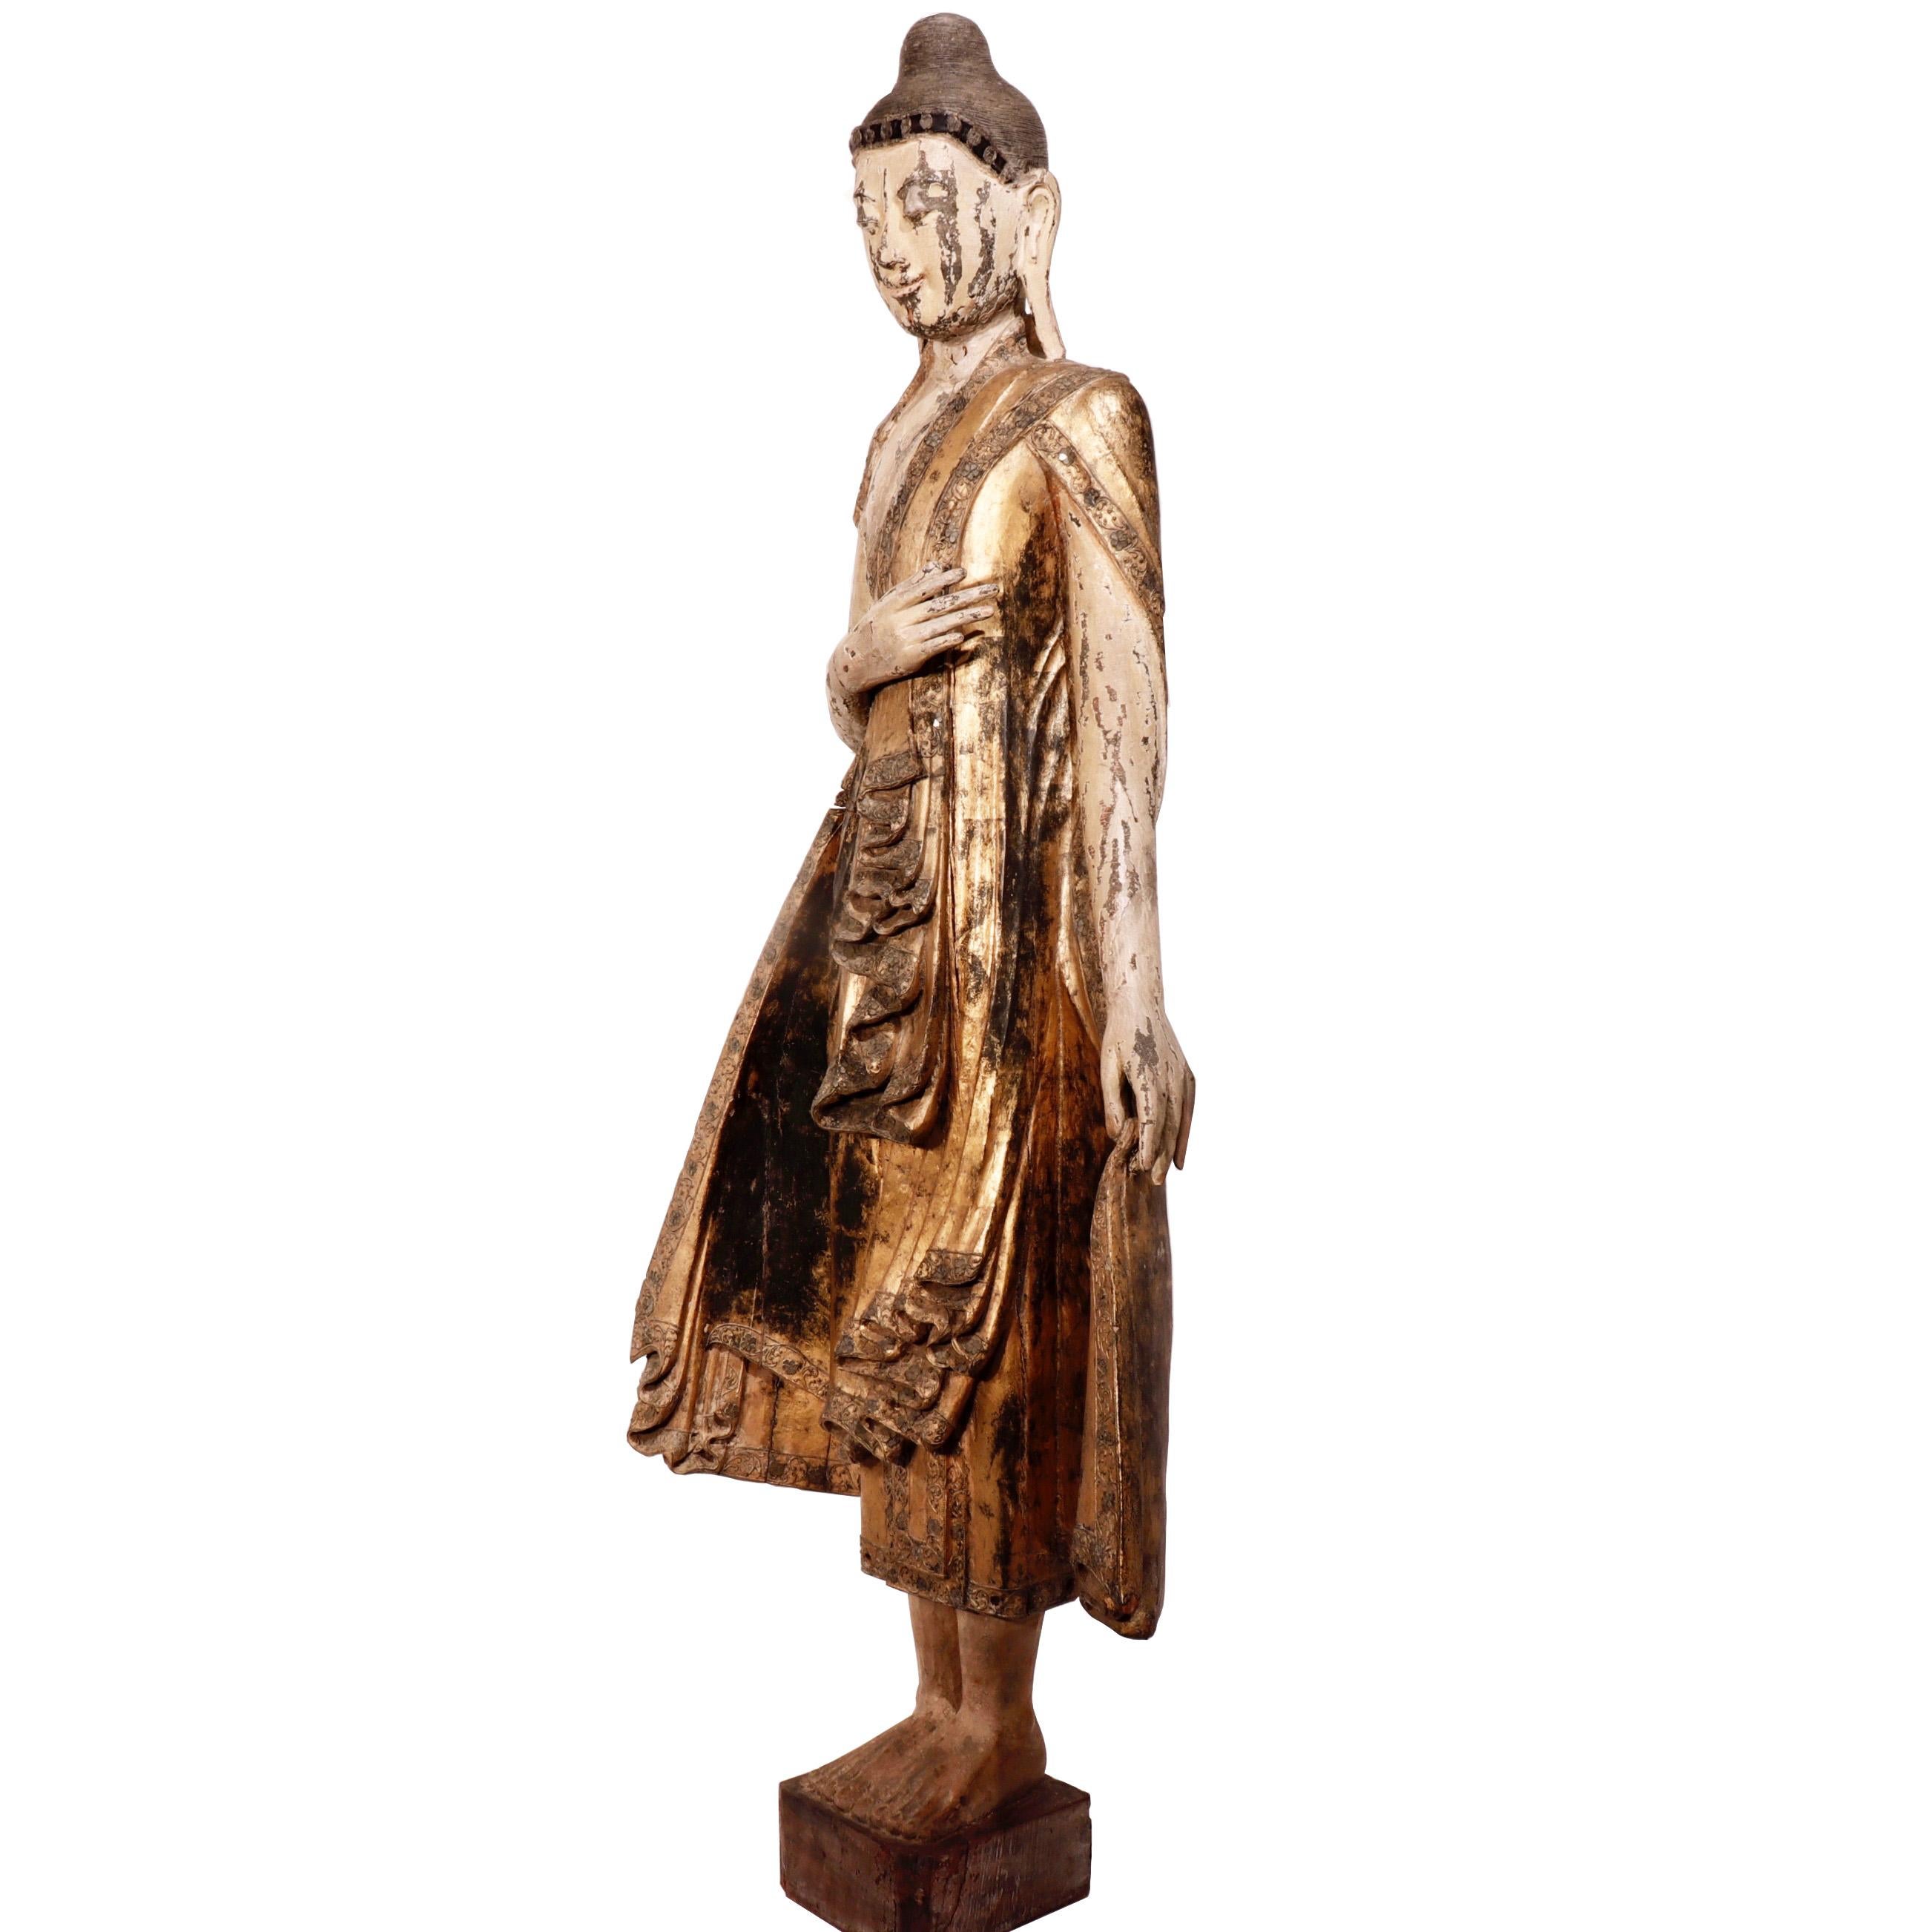 Burmese Mandalay carved wood figure of the standing Buddha on a square base, the left hand is in the varada or boon-granting mudra the right held up towards the chest, costumed in edge decorated robe with glass insets resembling a cape with the